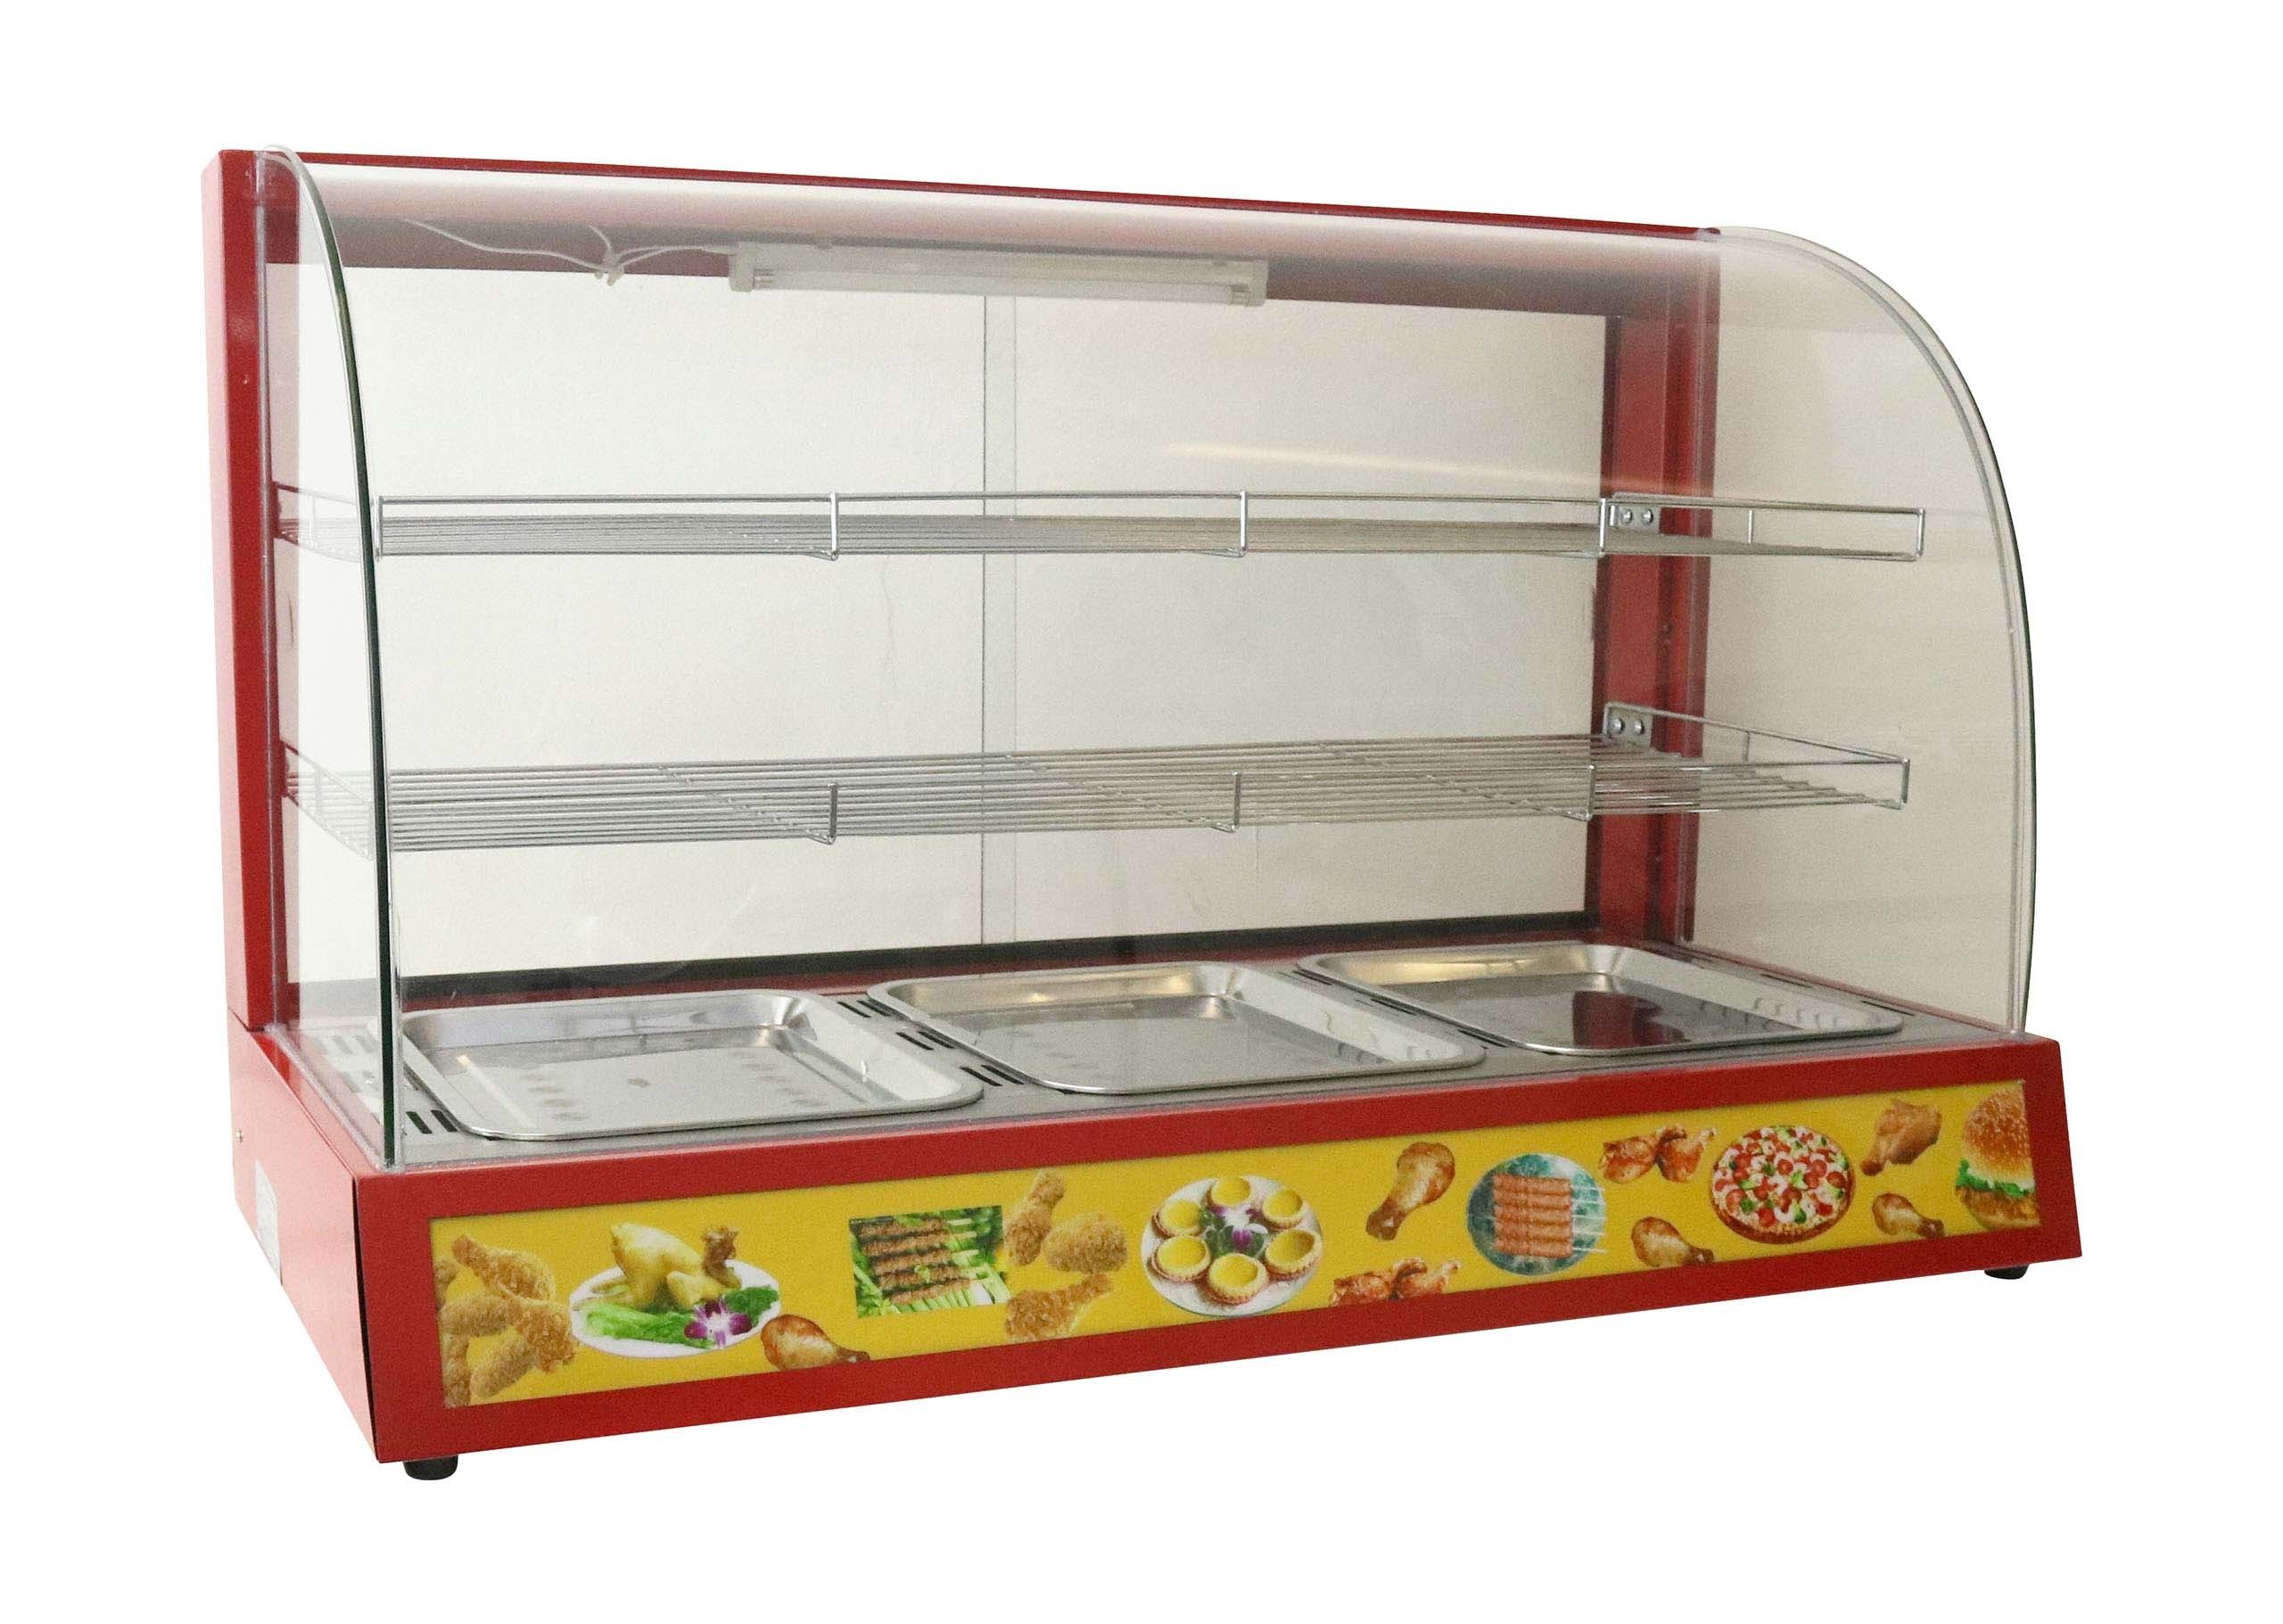 Modena Cdg10 Modena Cdg10 Pie Warmer Hot Food Display Cabinet for proportions 2560 X 1821